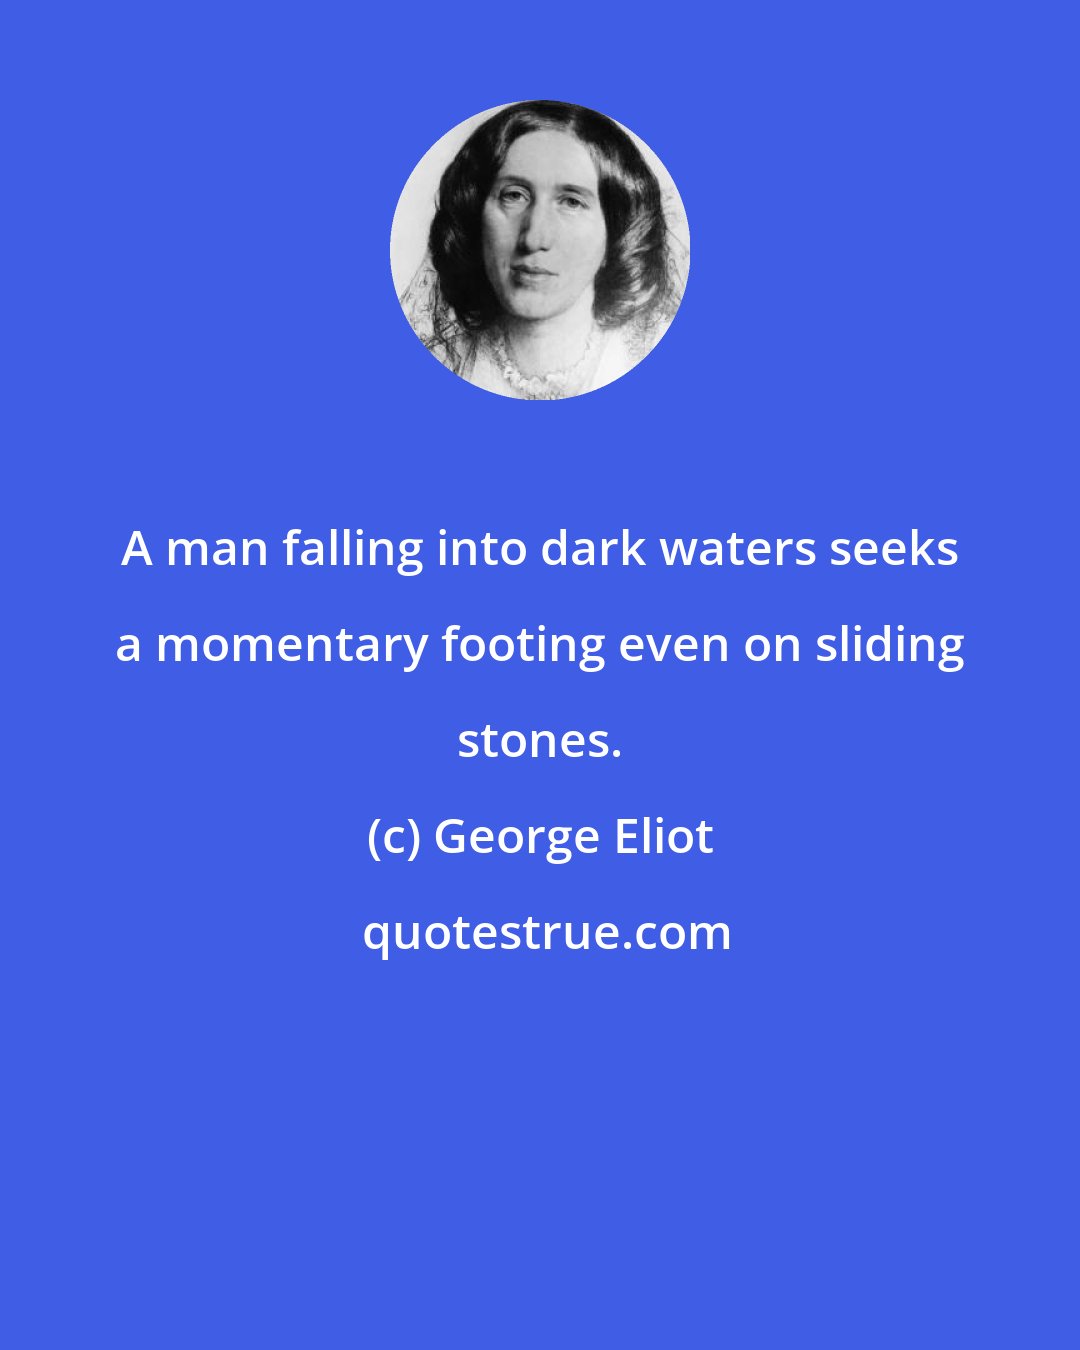 George Eliot: A man falling into dark waters seeks a momentary footing even on sliding stones.